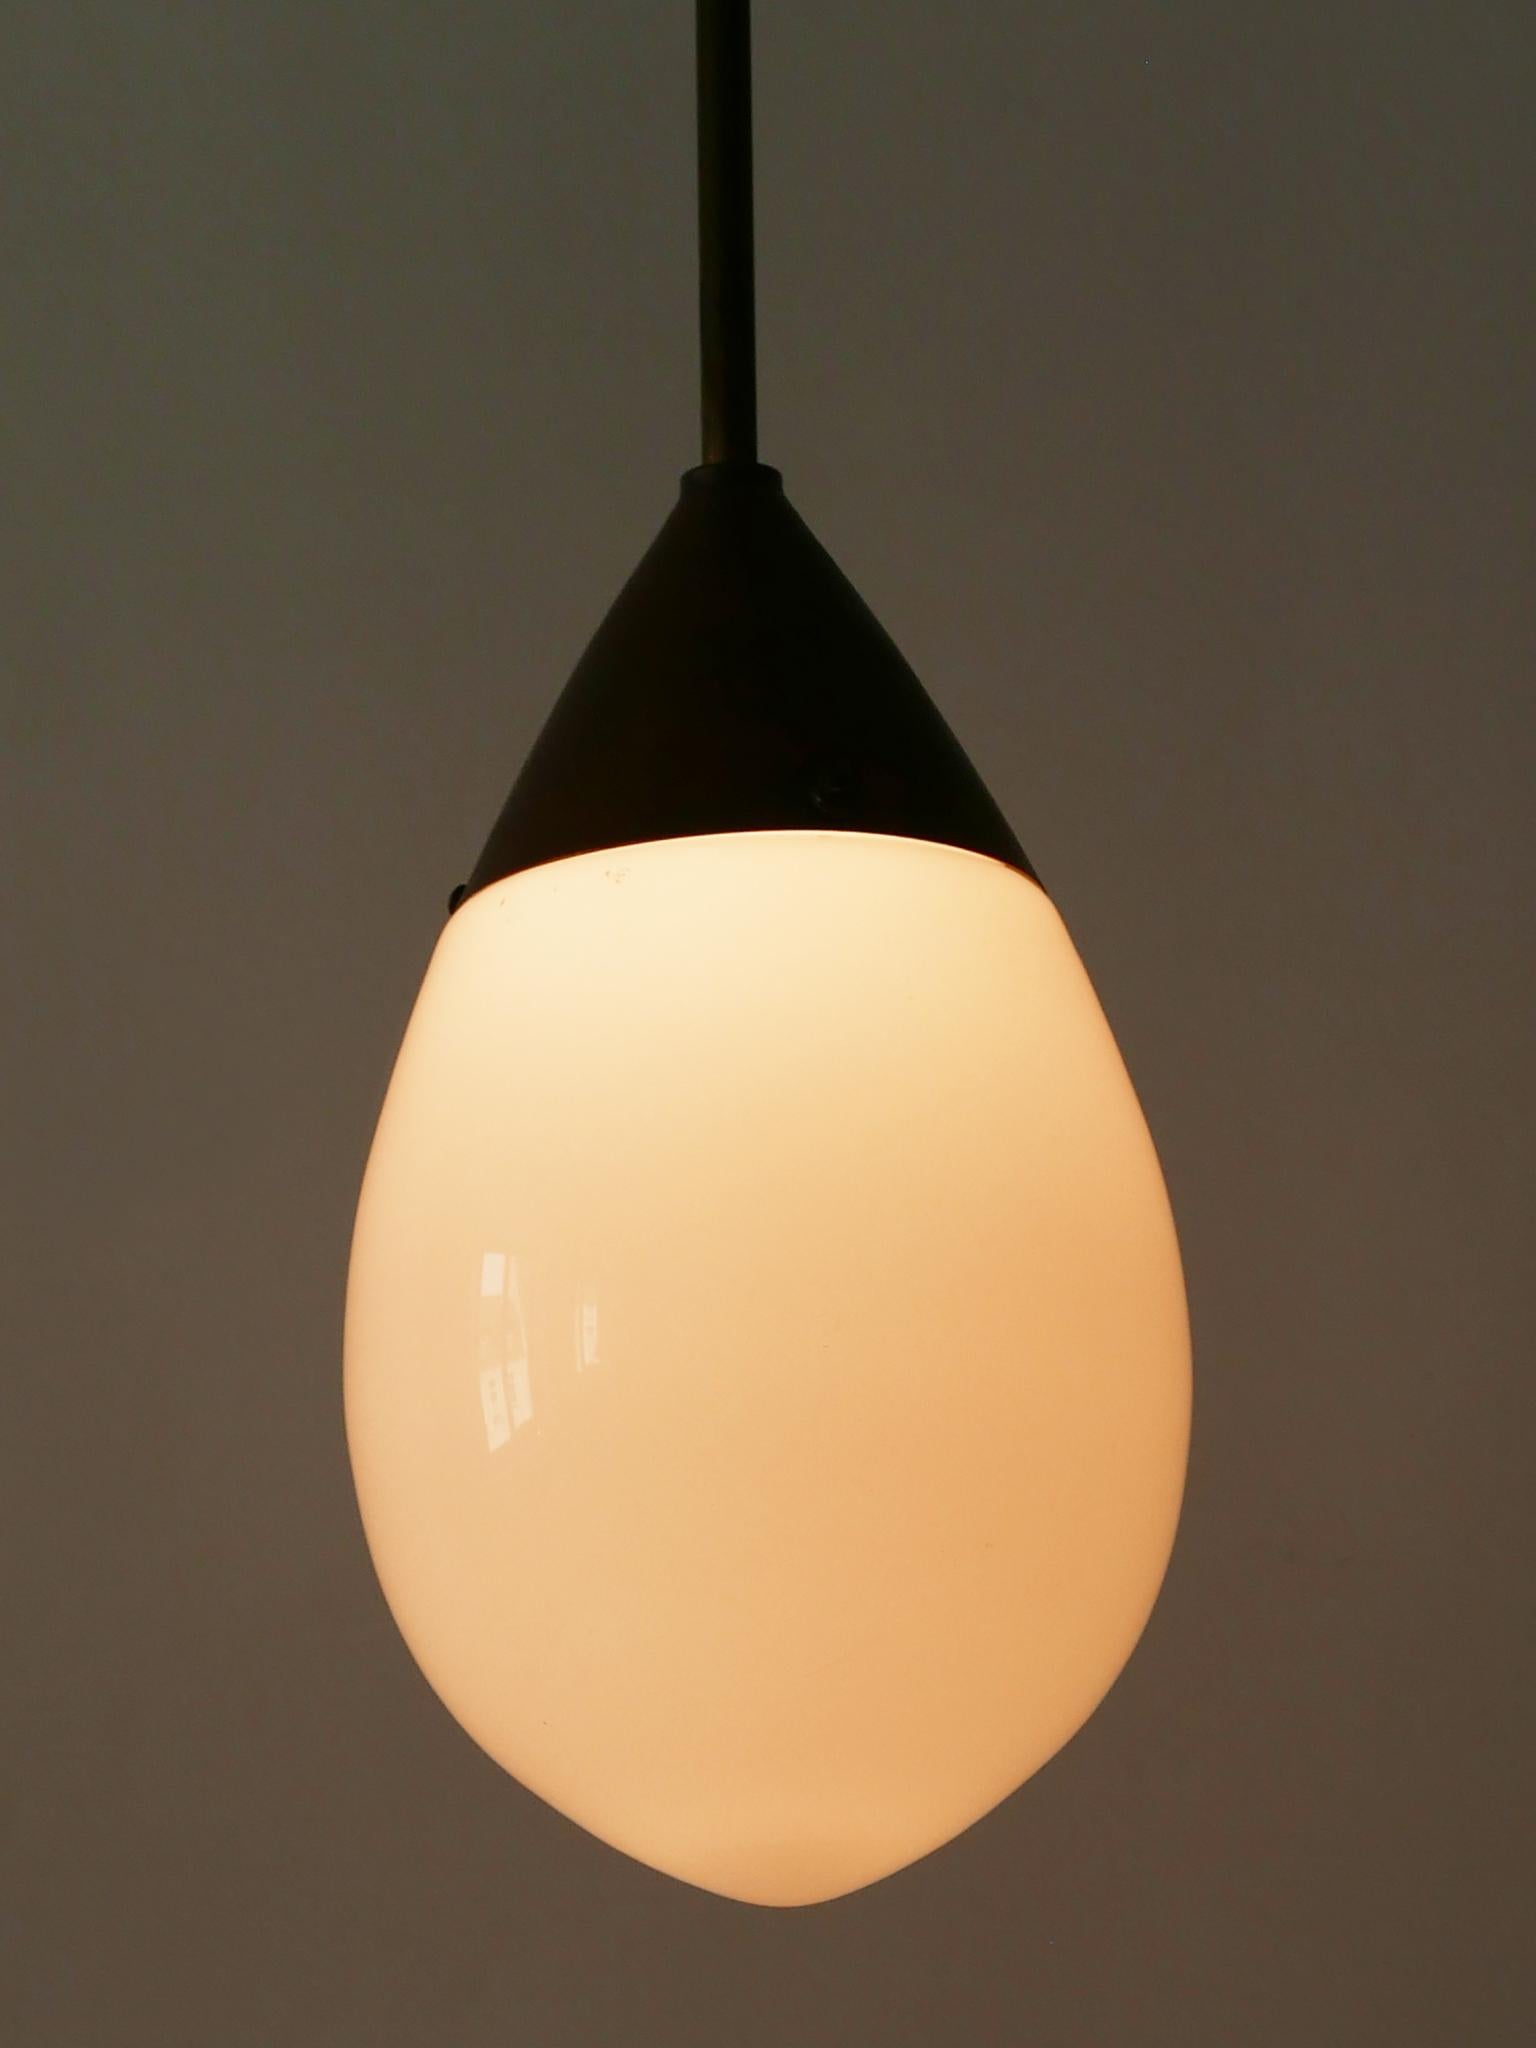 Exceptional Bauhaus Pendant Lamp or Hanging Light Drop by Siemens 1920s, Germany For Sale 10